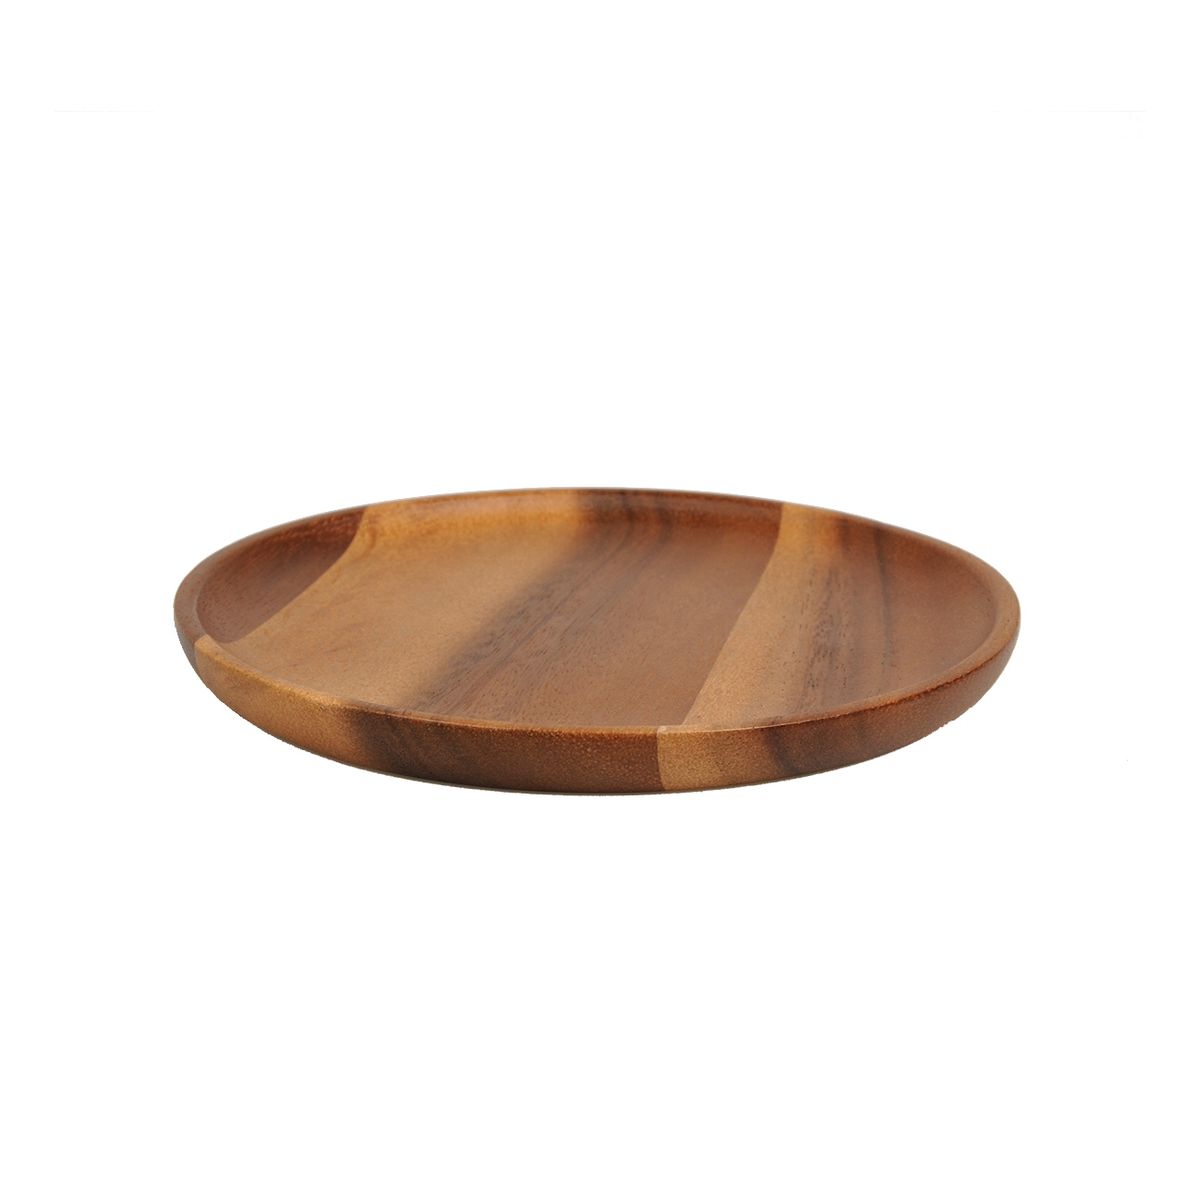 Acacia Wood Serving Tray Durable Dishwasher Safe Rectangular Party Plates Household Tableware, Size: 20*10cm, Black